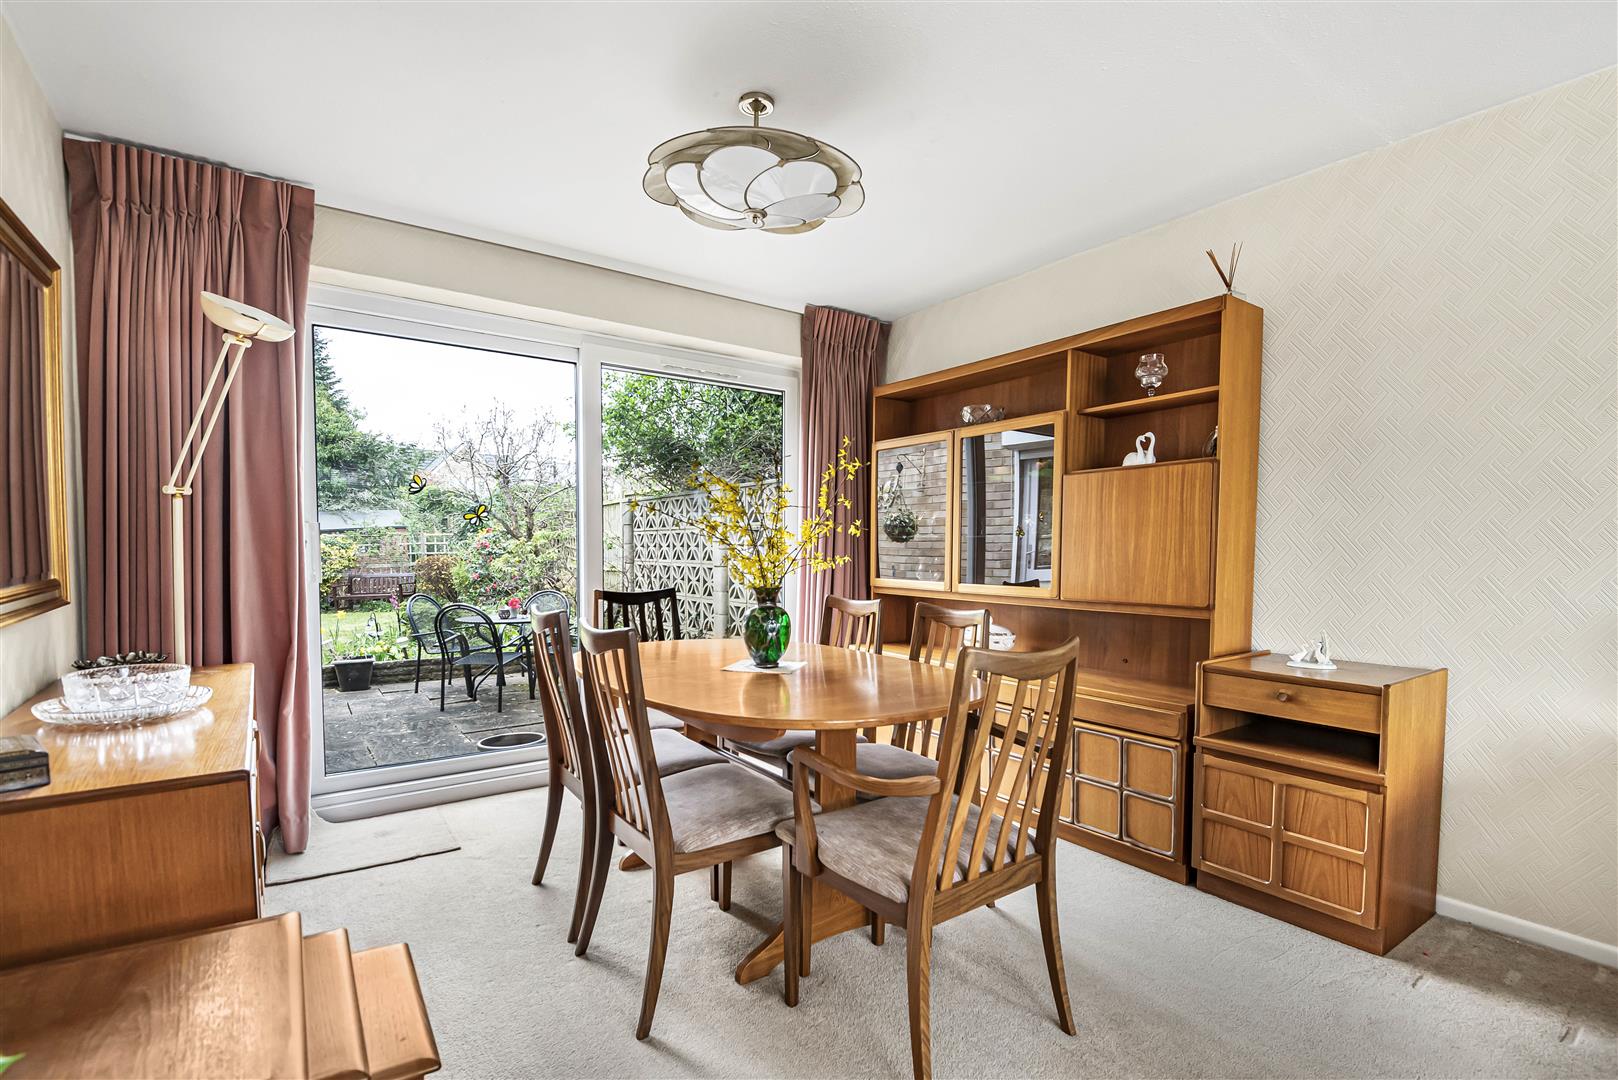 Silverthorne Drive Caversham house for sale in Reading